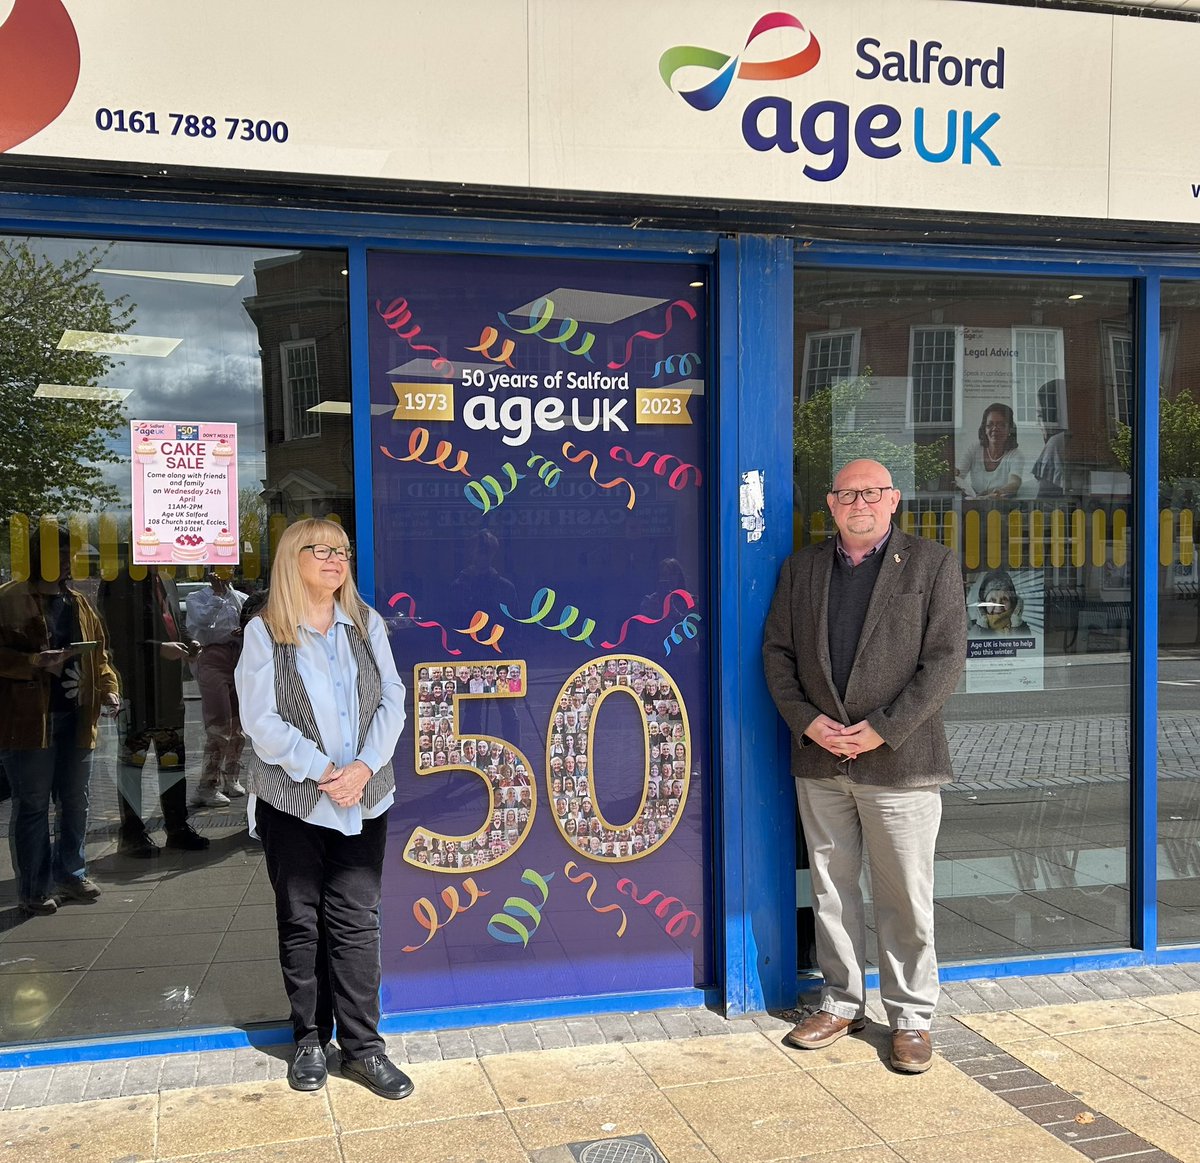 If you’re out and about in Eccles today, come along to @AgeUKSalford for their cake sale! Age UK Salford are celebrating 50 years of making a difference in our community, come and join in the celebration, grab a cake and make a donation!🧁🍰💫